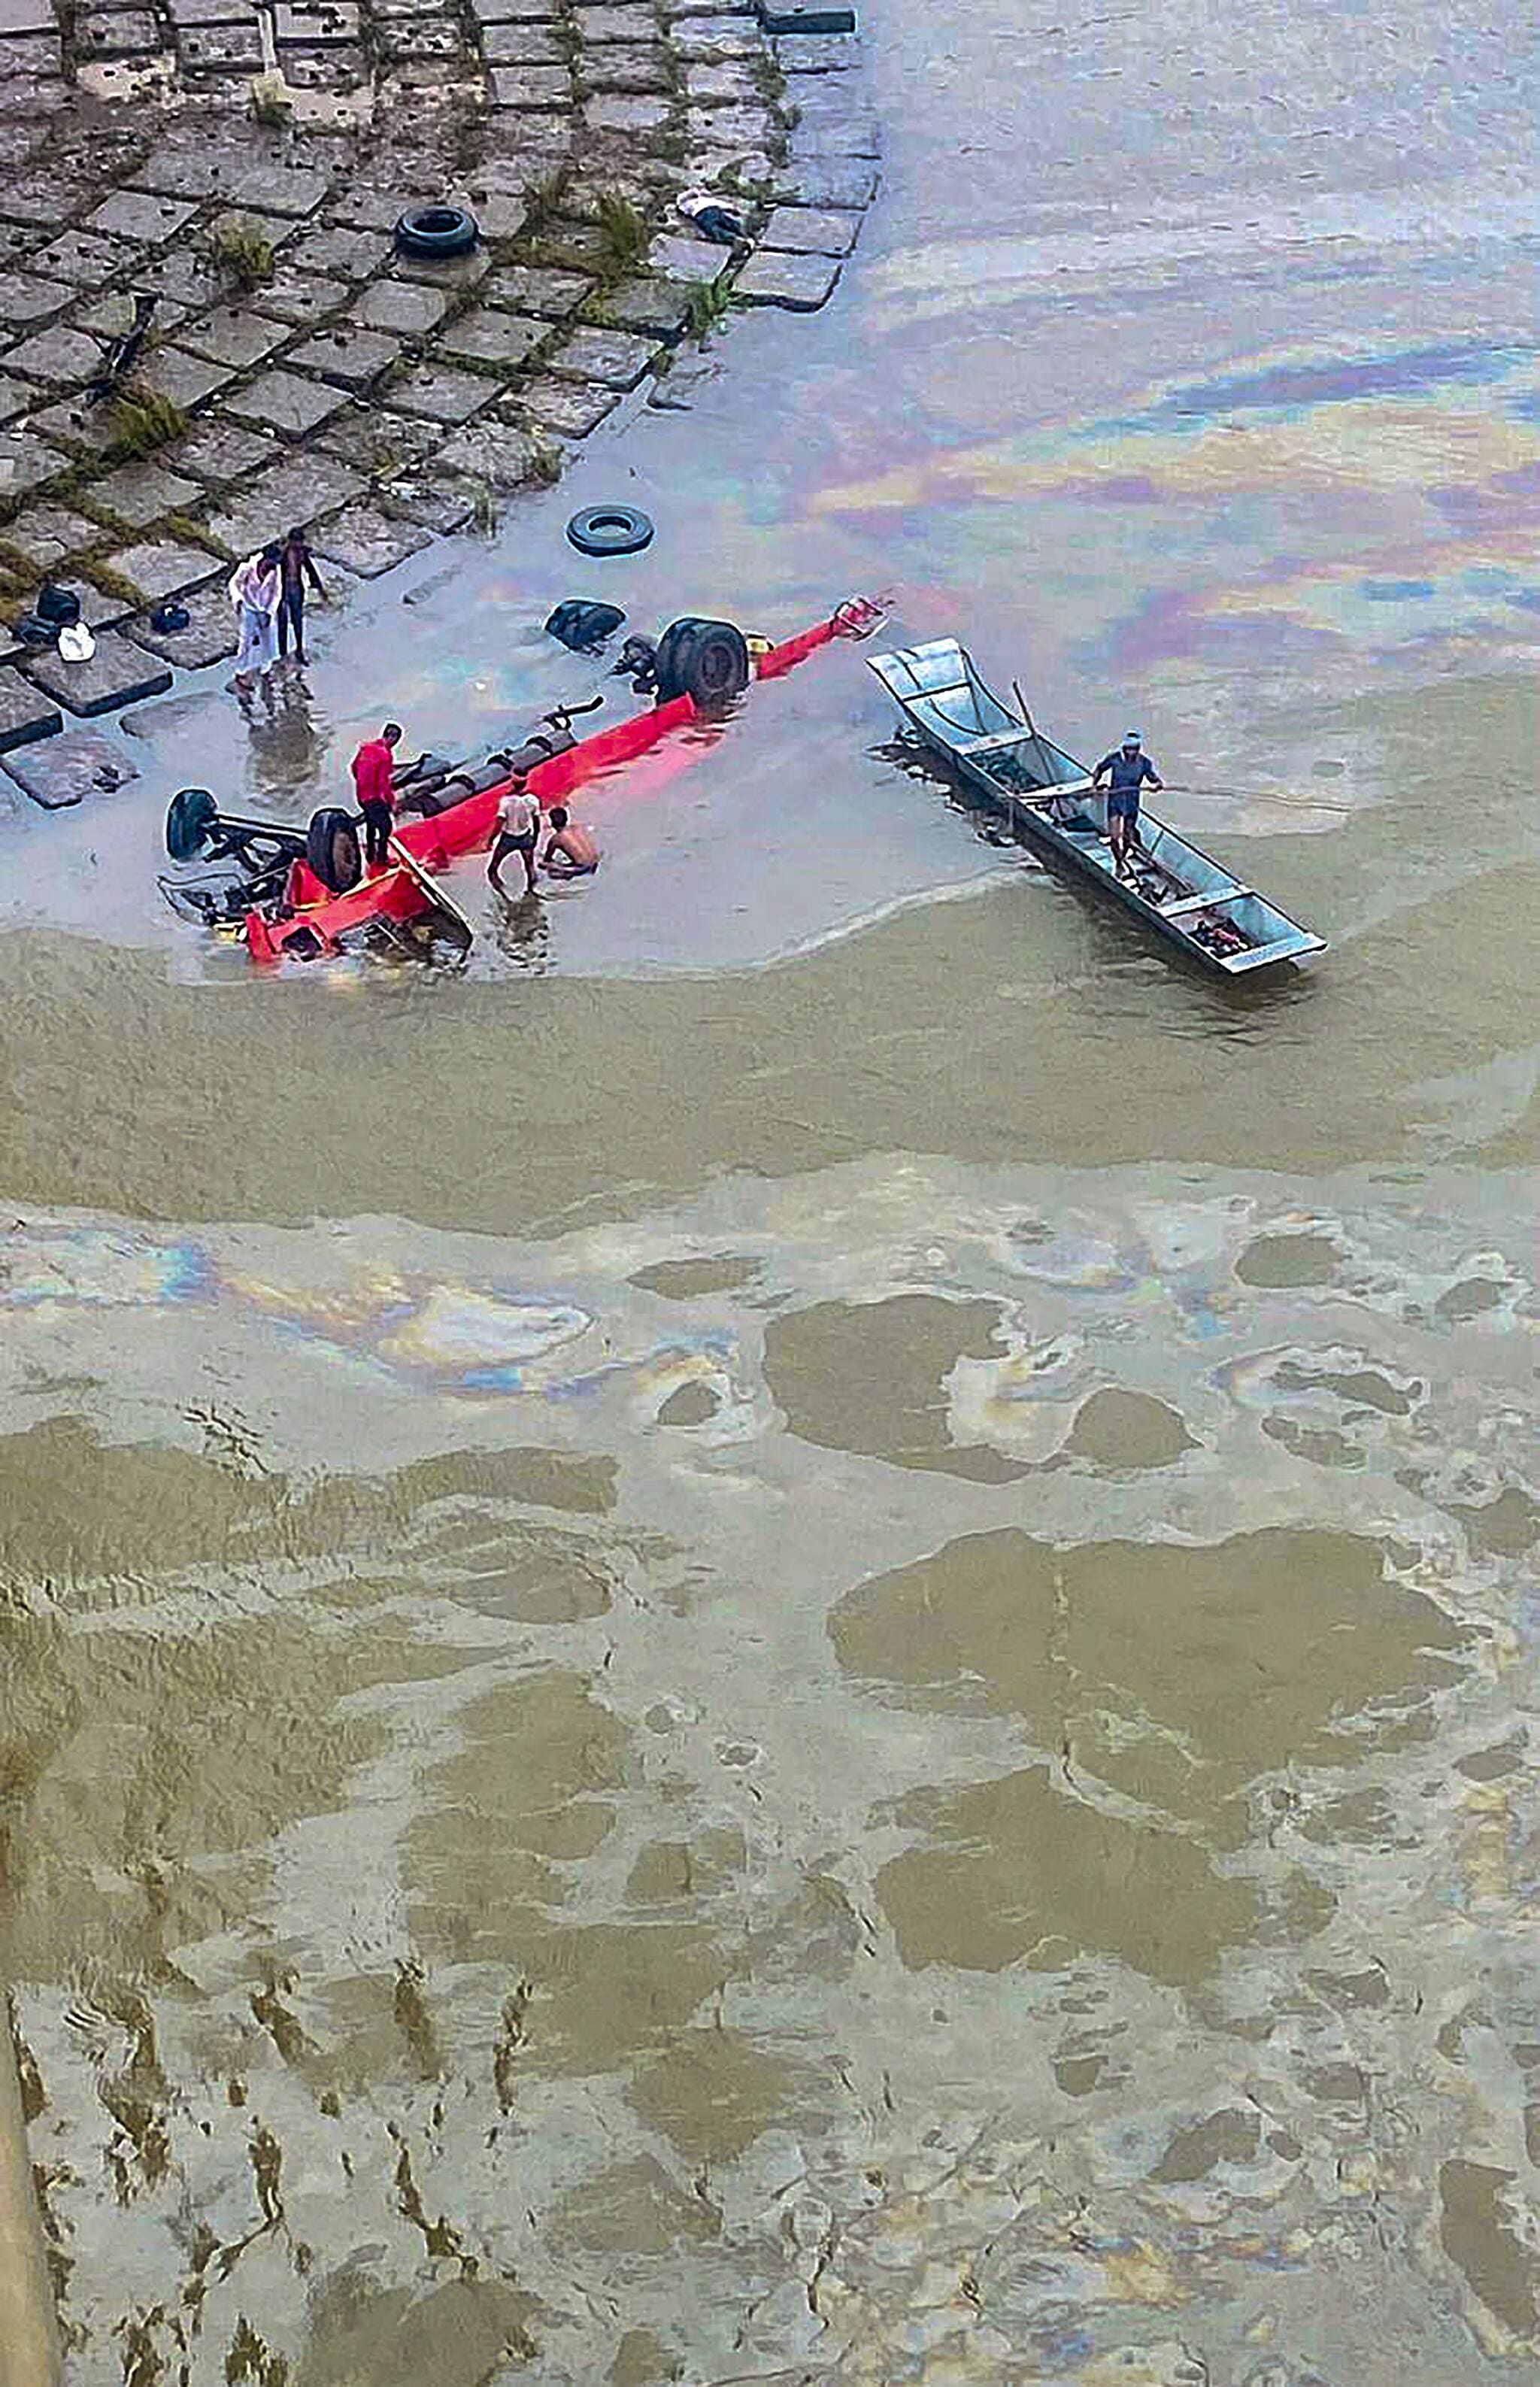 Dhar: Rescue operation underway after a Maharashtra State Road Transport Corporation (MSRTC) bus fell into the Narmada river, in Dhar district, Monday, July 18, 2022. At least 12 passengers were killed, according to officials. (PTI Photo)(